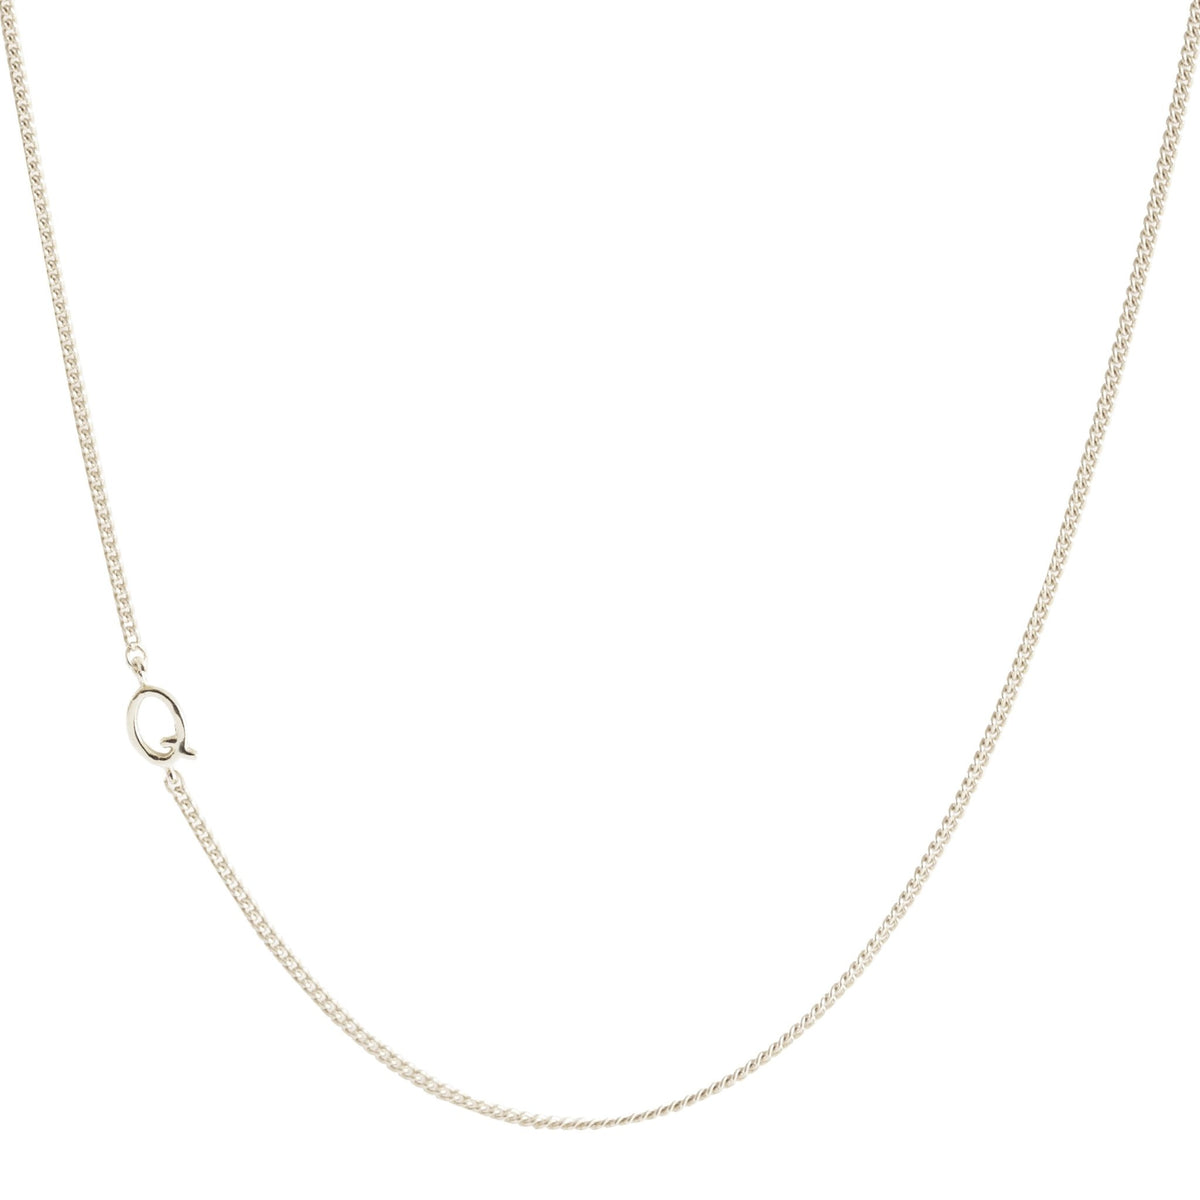 NOTABLE OFFSET INITIAL NECKLACE - Q - GOLD, ROSE GOLD, OR SILVER - SO PRETTY CARA COTTER